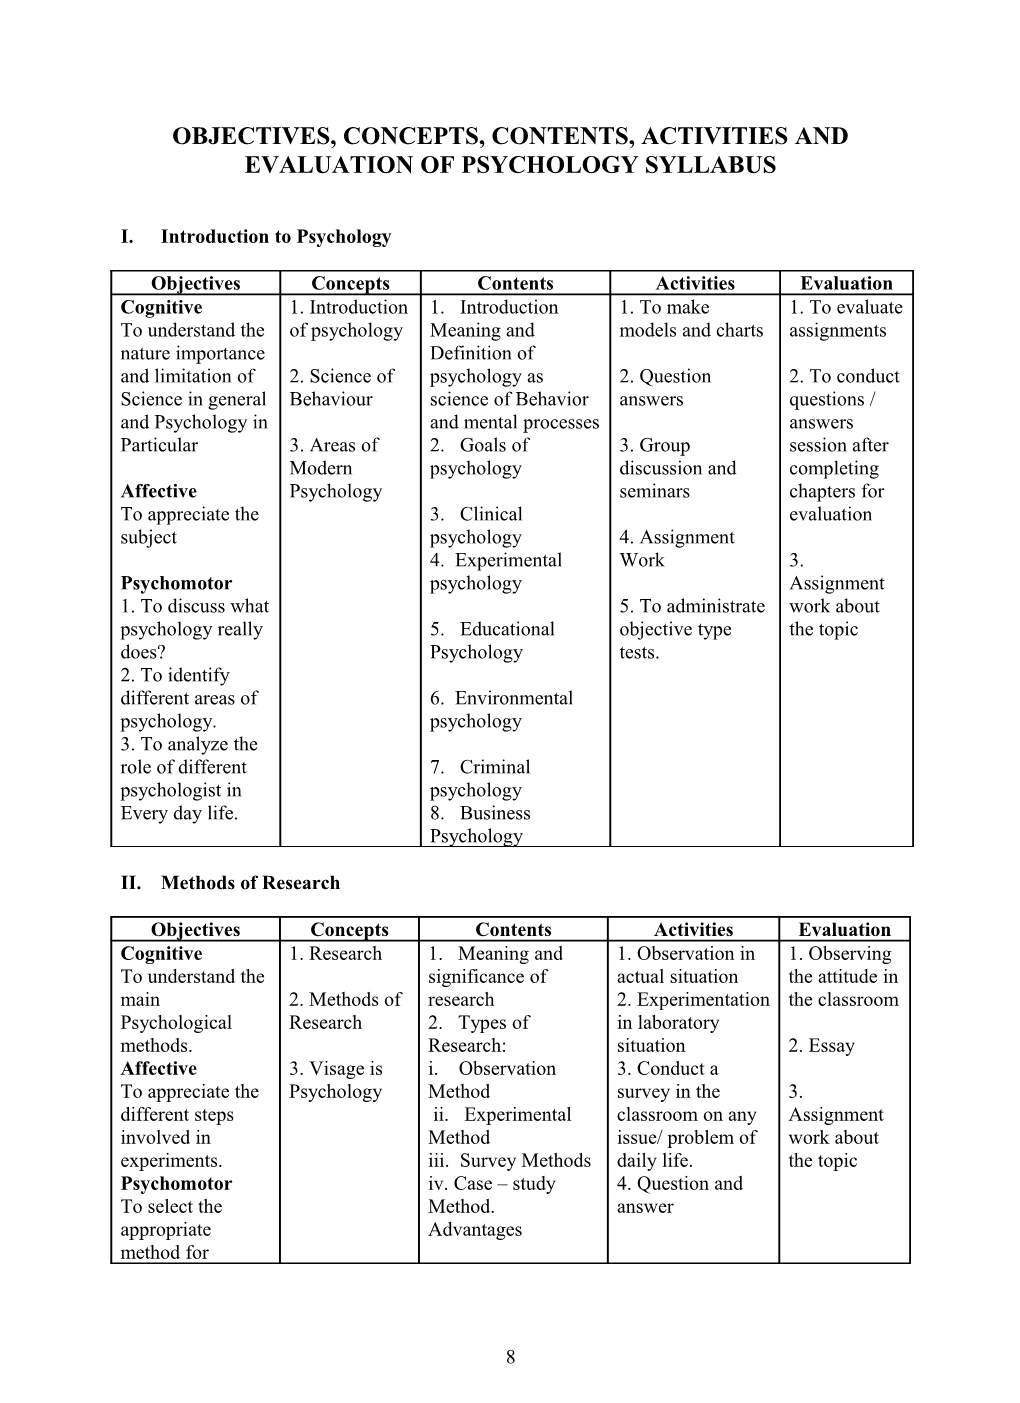 Objectives, Concepts, Contents, Activities and Evaluation of Psychology Syllabus